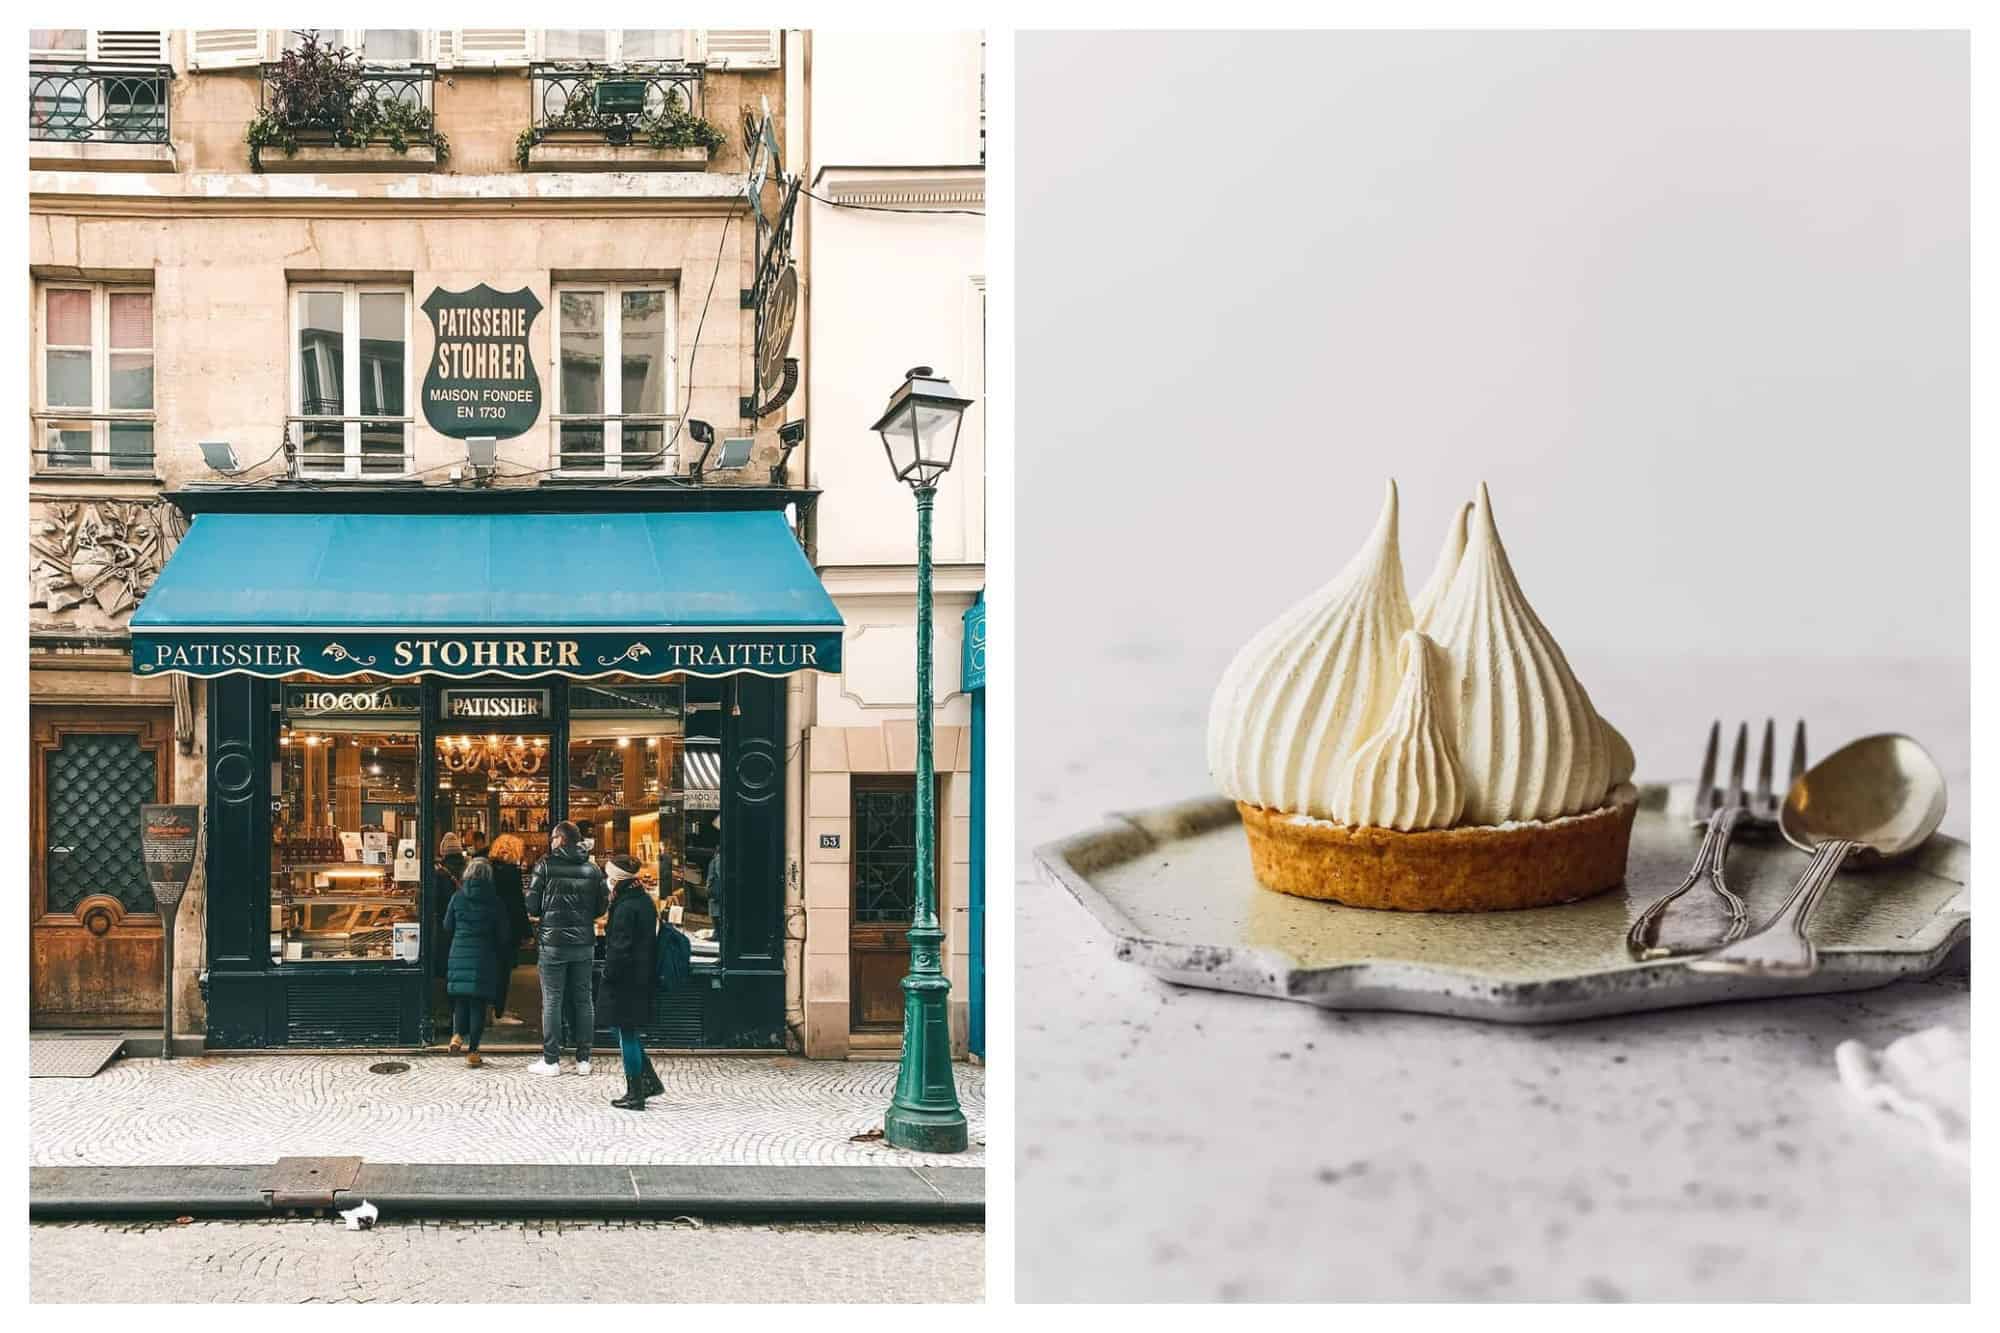 Left: Stohrer, the oldest patisserie in Paris, is pictures with its usual queue of clients. Right: A cute little piece of Tarte Citron Meringuée is captured in a dish with a spoon and a fork.